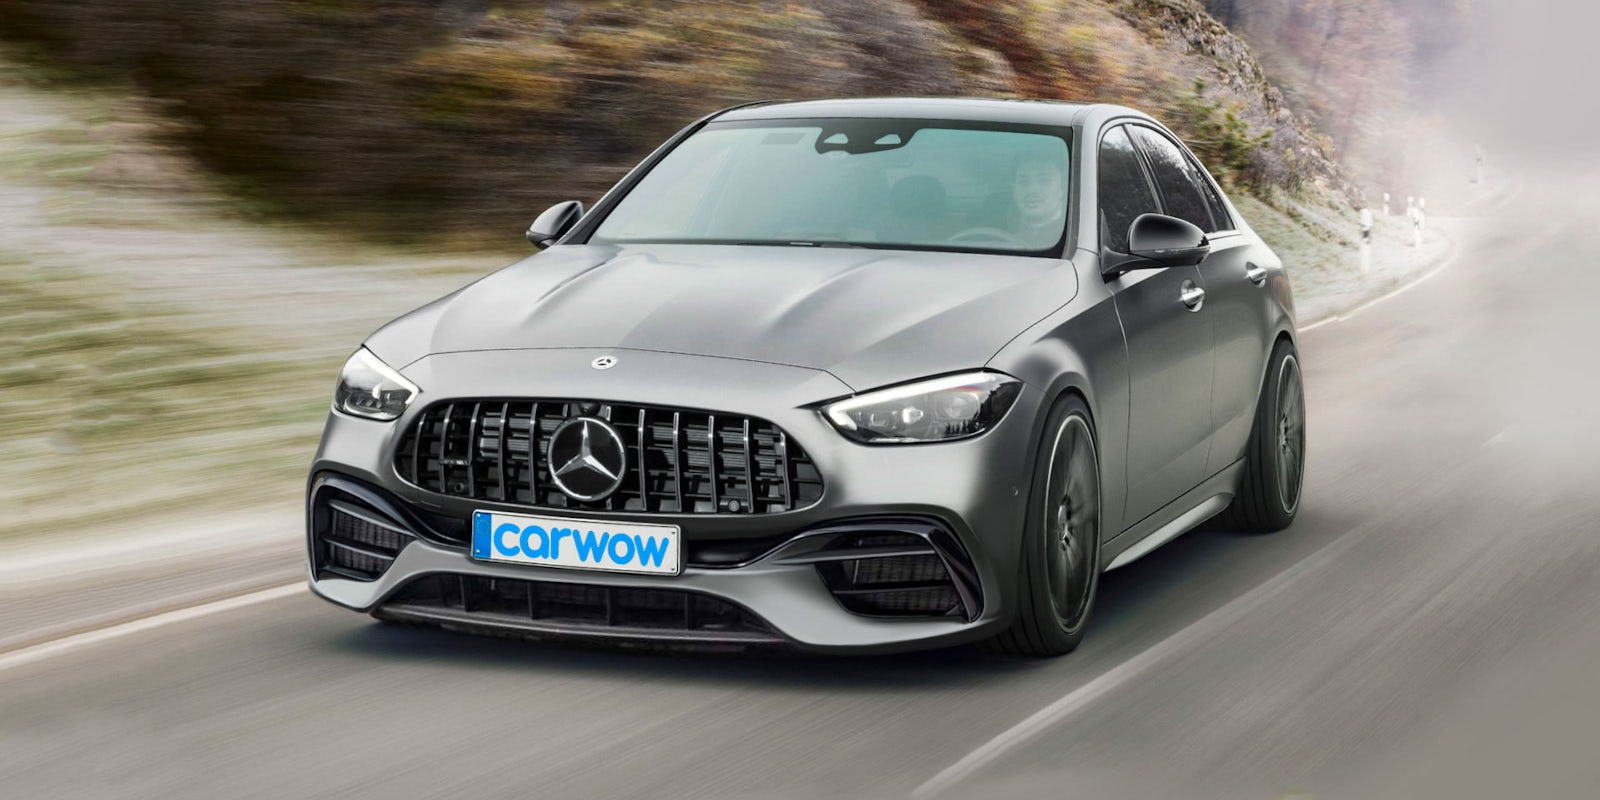 New Mercedes Amg C63 Hybrid Revealed In Exclusive Renderings Price Specs And Release Date Carwow